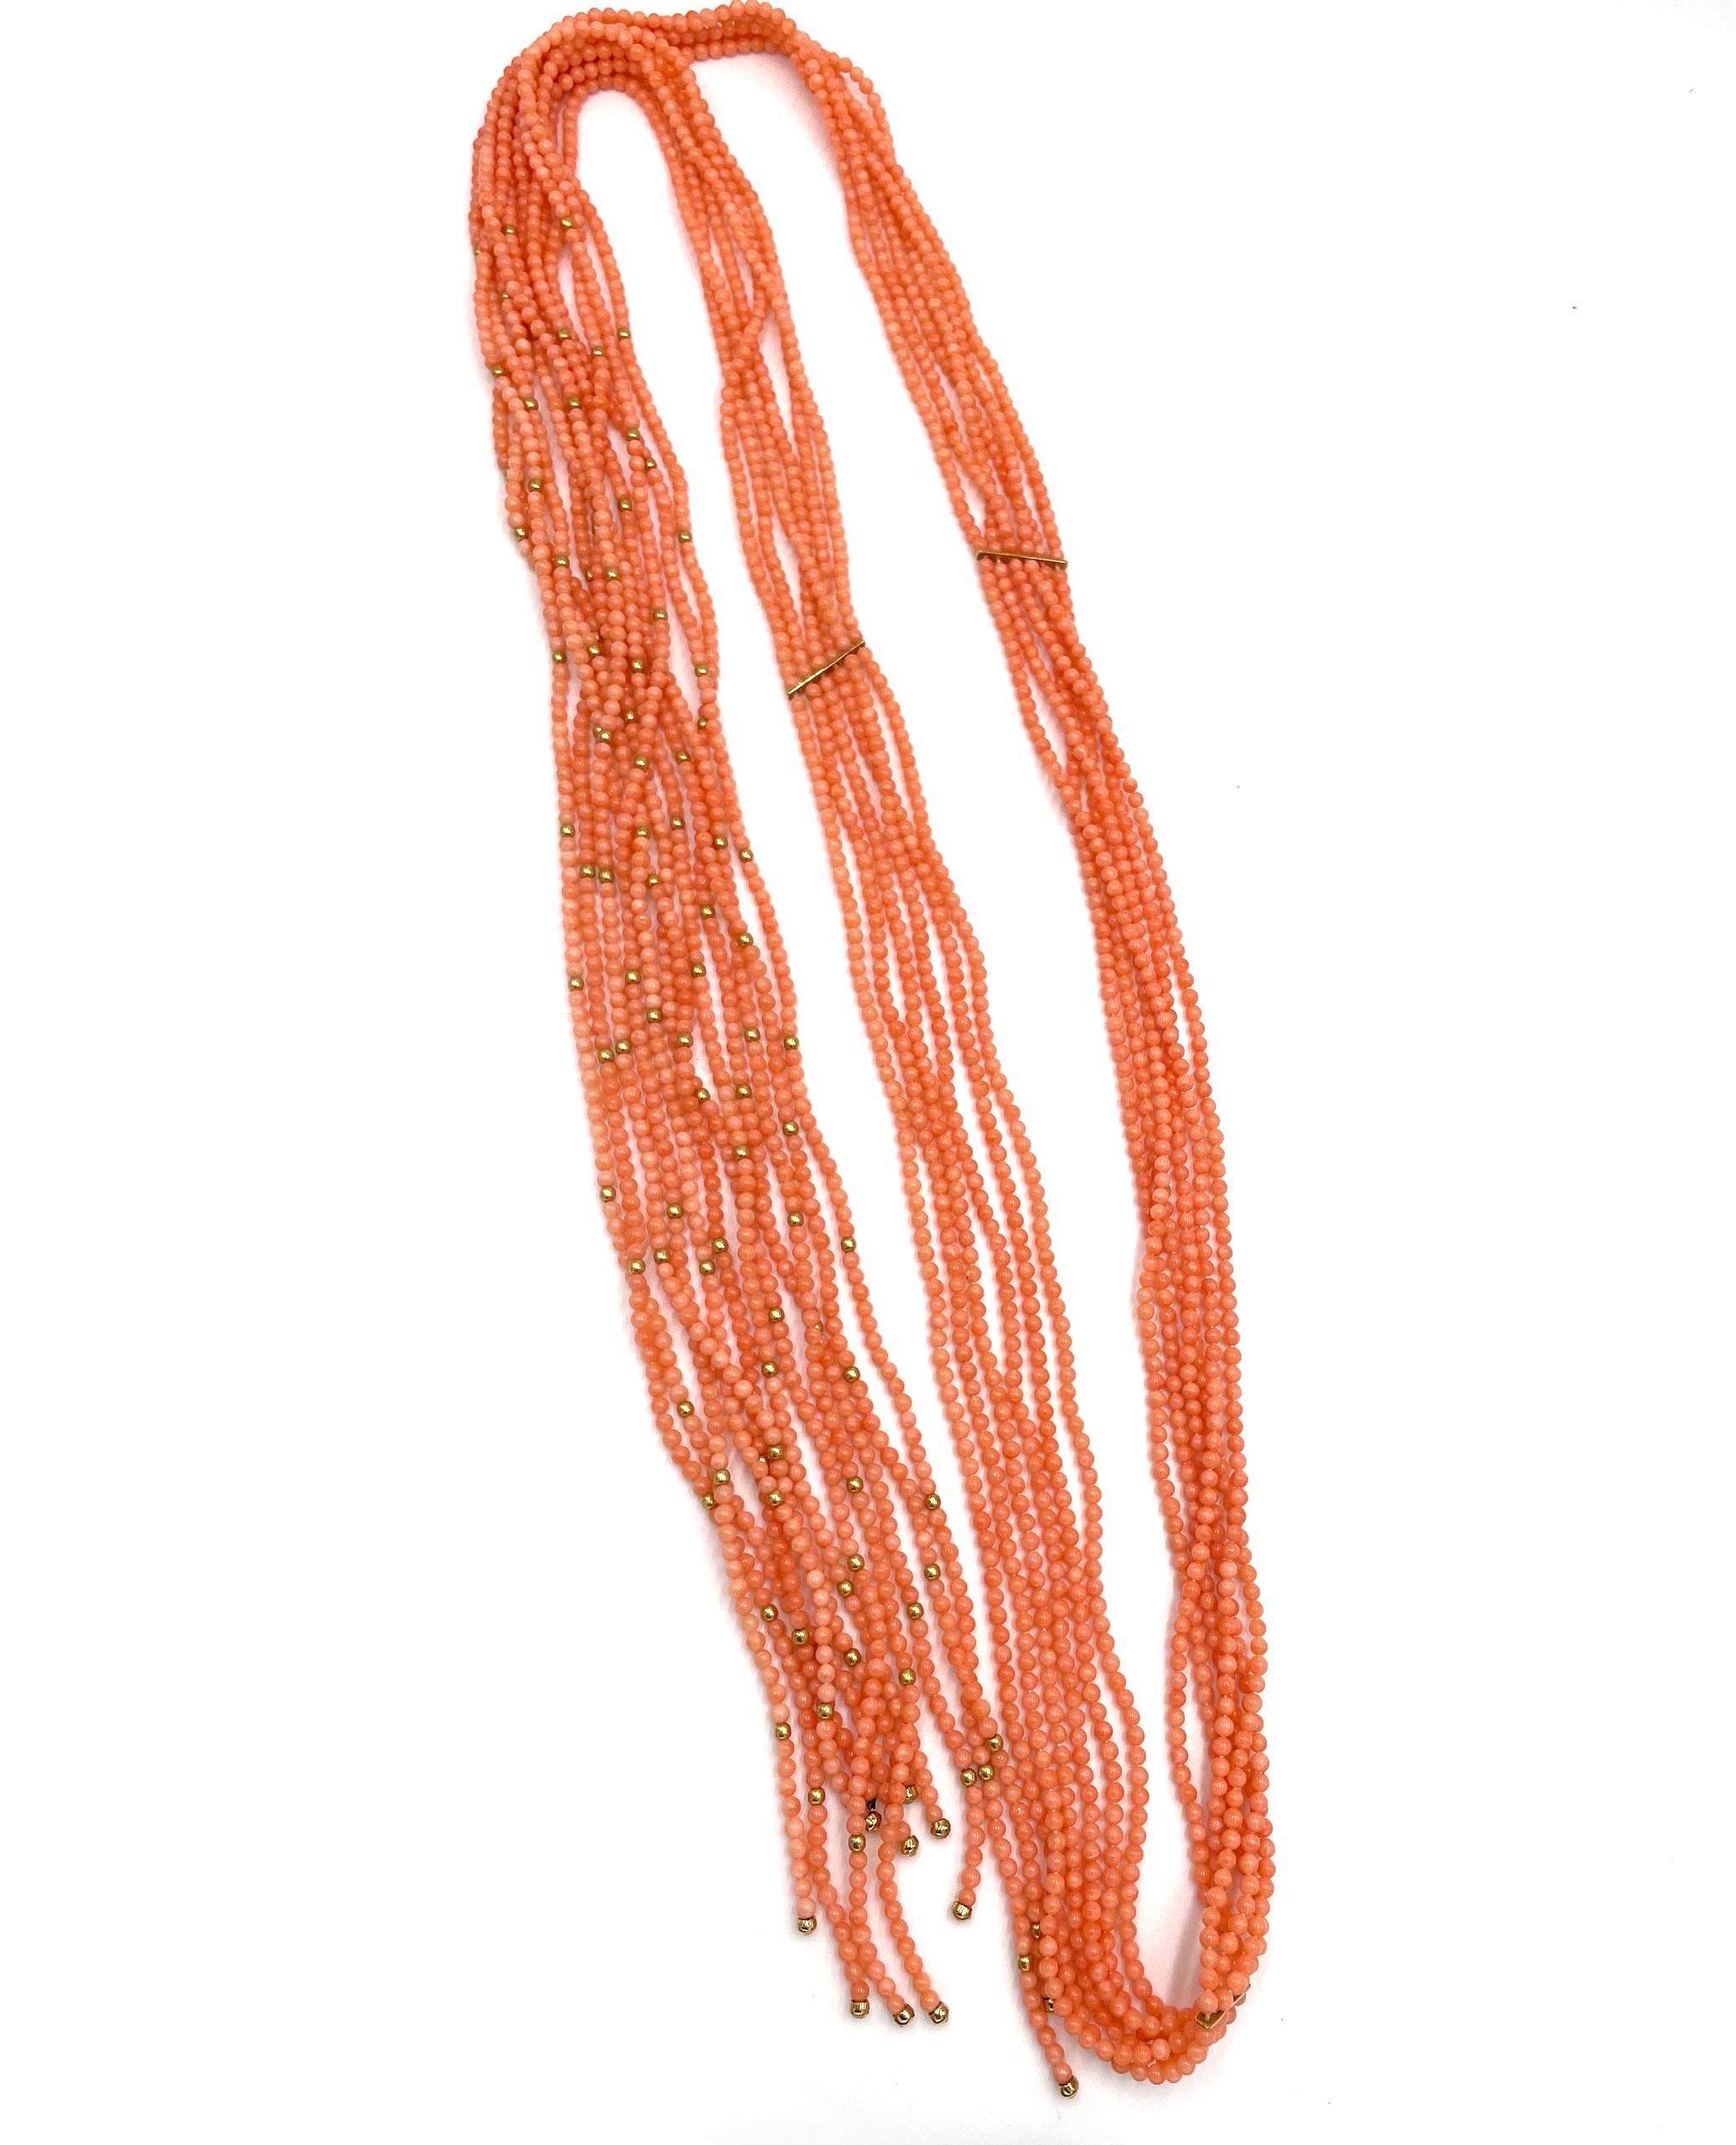 Pre owned vintage estate multi strand coral beaded scarf necklace with 18k yellow gold beads.  The unique strand is 58 inches long and they are strung with three keepers/bars: One in the center back and two 9.75  inches down on either side.  There